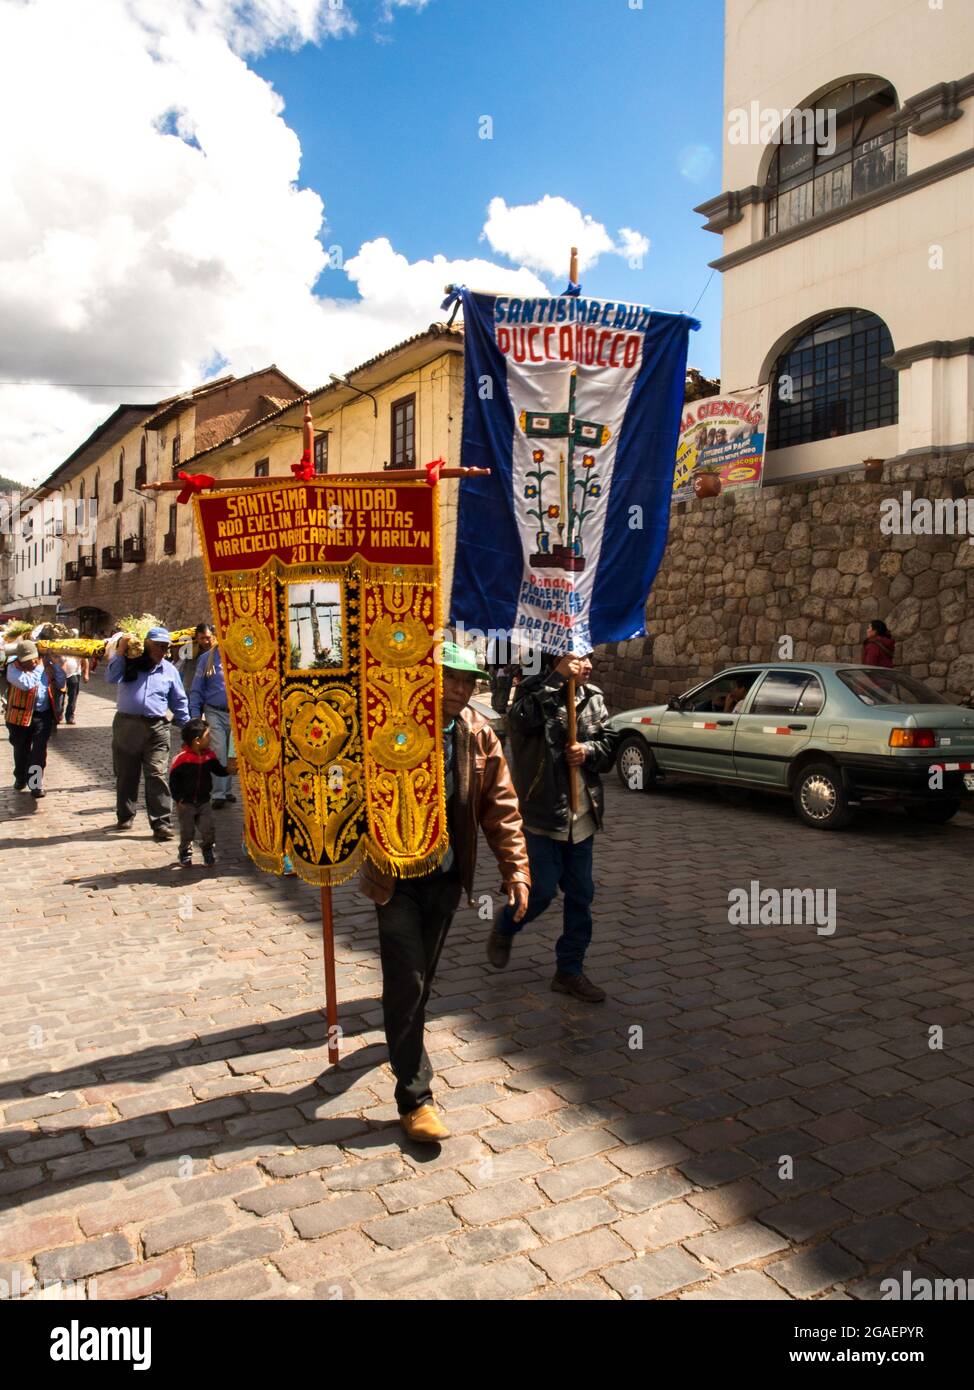 Cusco, Peru - May 2016: Procession with banners on the street in Cusco. Sacred Valley, South America Stock Photo